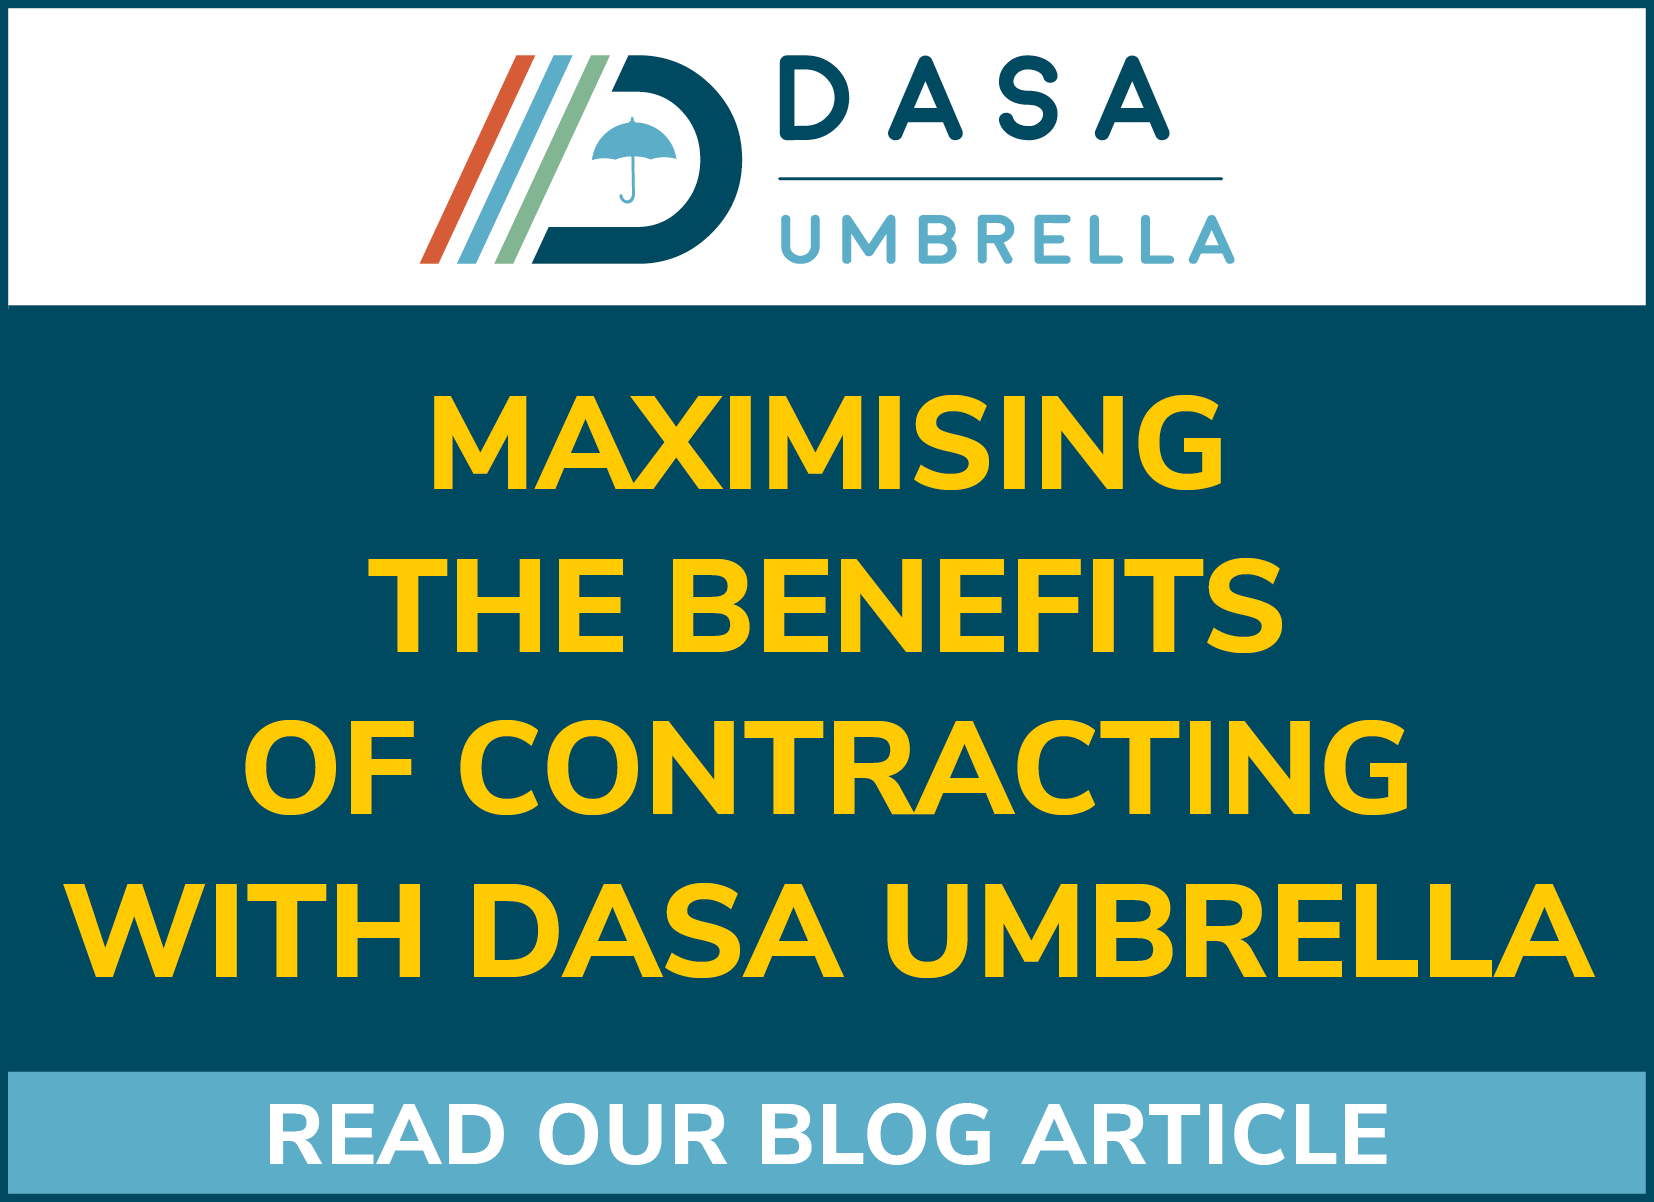 MAXIMISING THE BENEFITS OF CONTRACTING